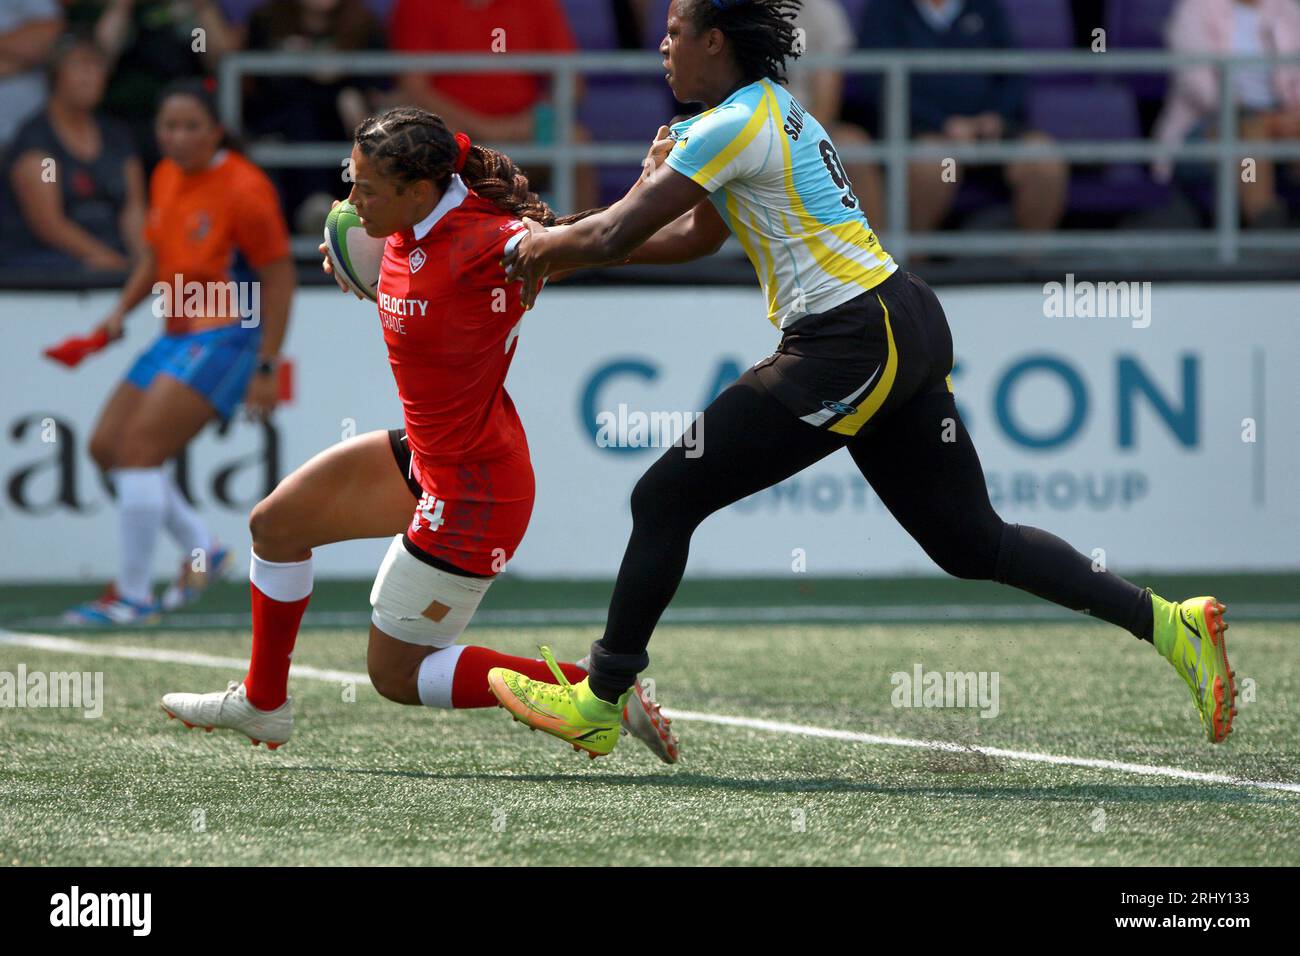 Team Canada's Asia Hogan Rochester, front left, avoids a tackle